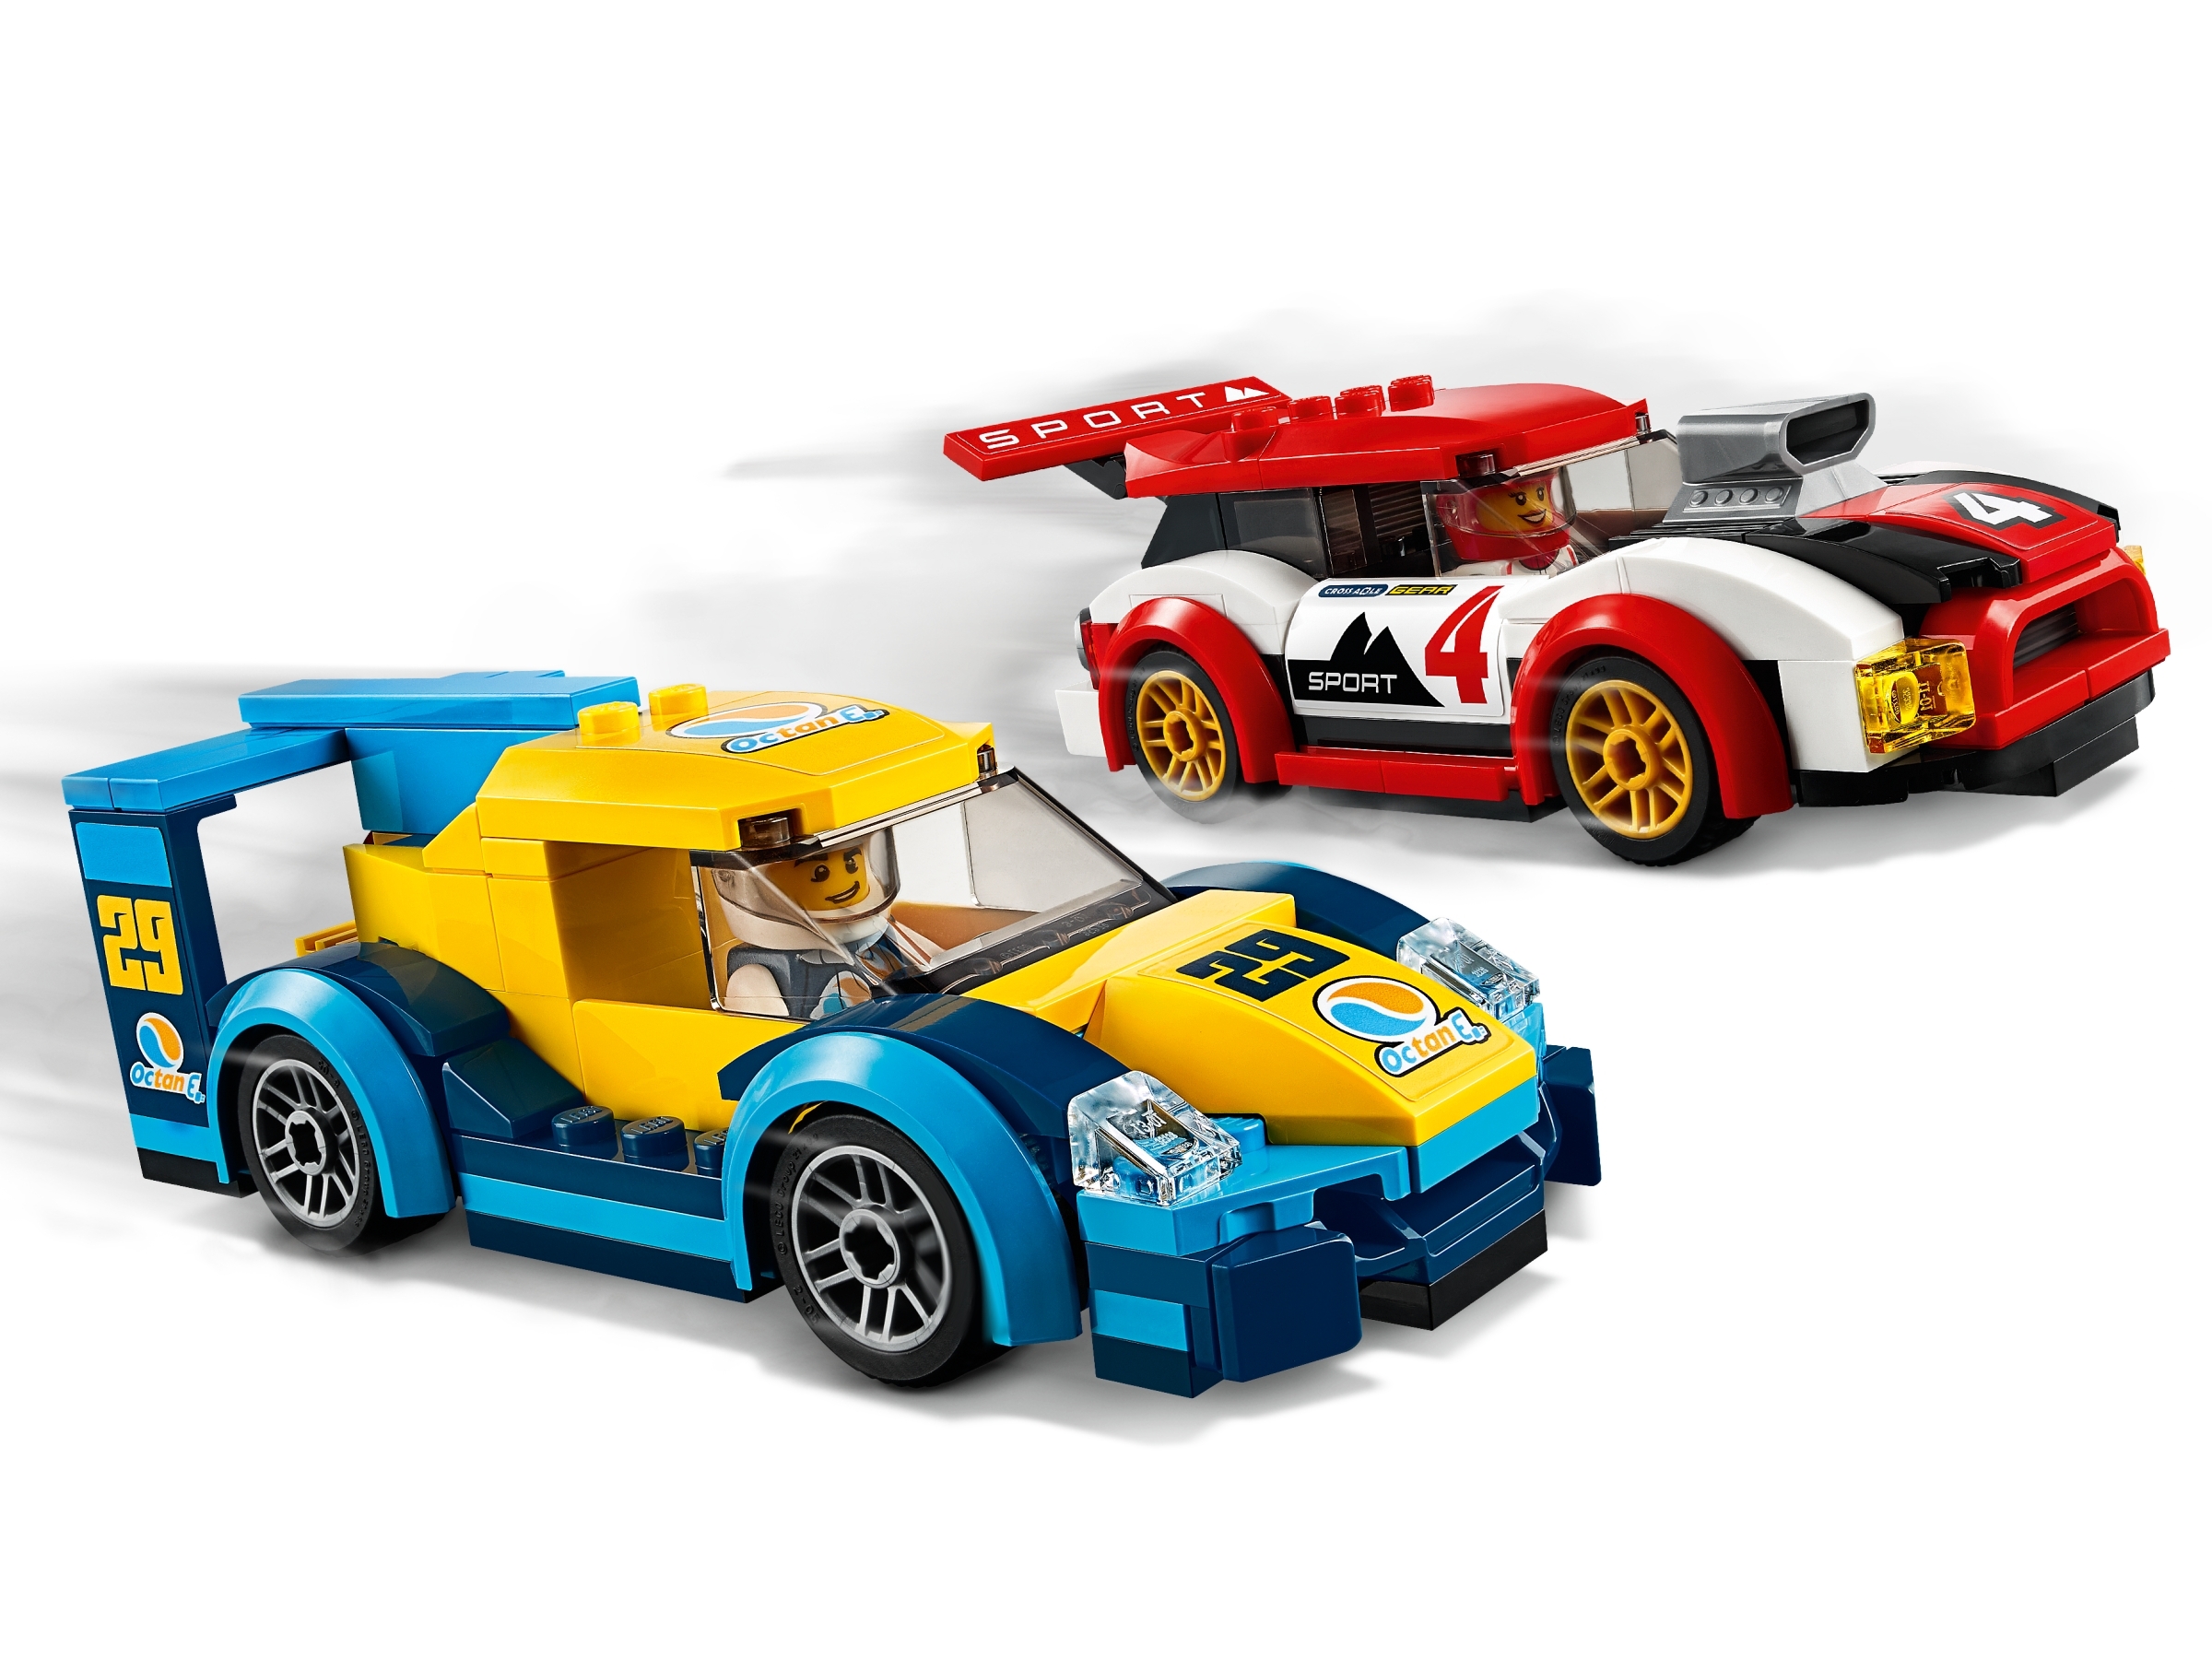 LEGO Racing Cars City Nitro Wheels for sale online 60256 